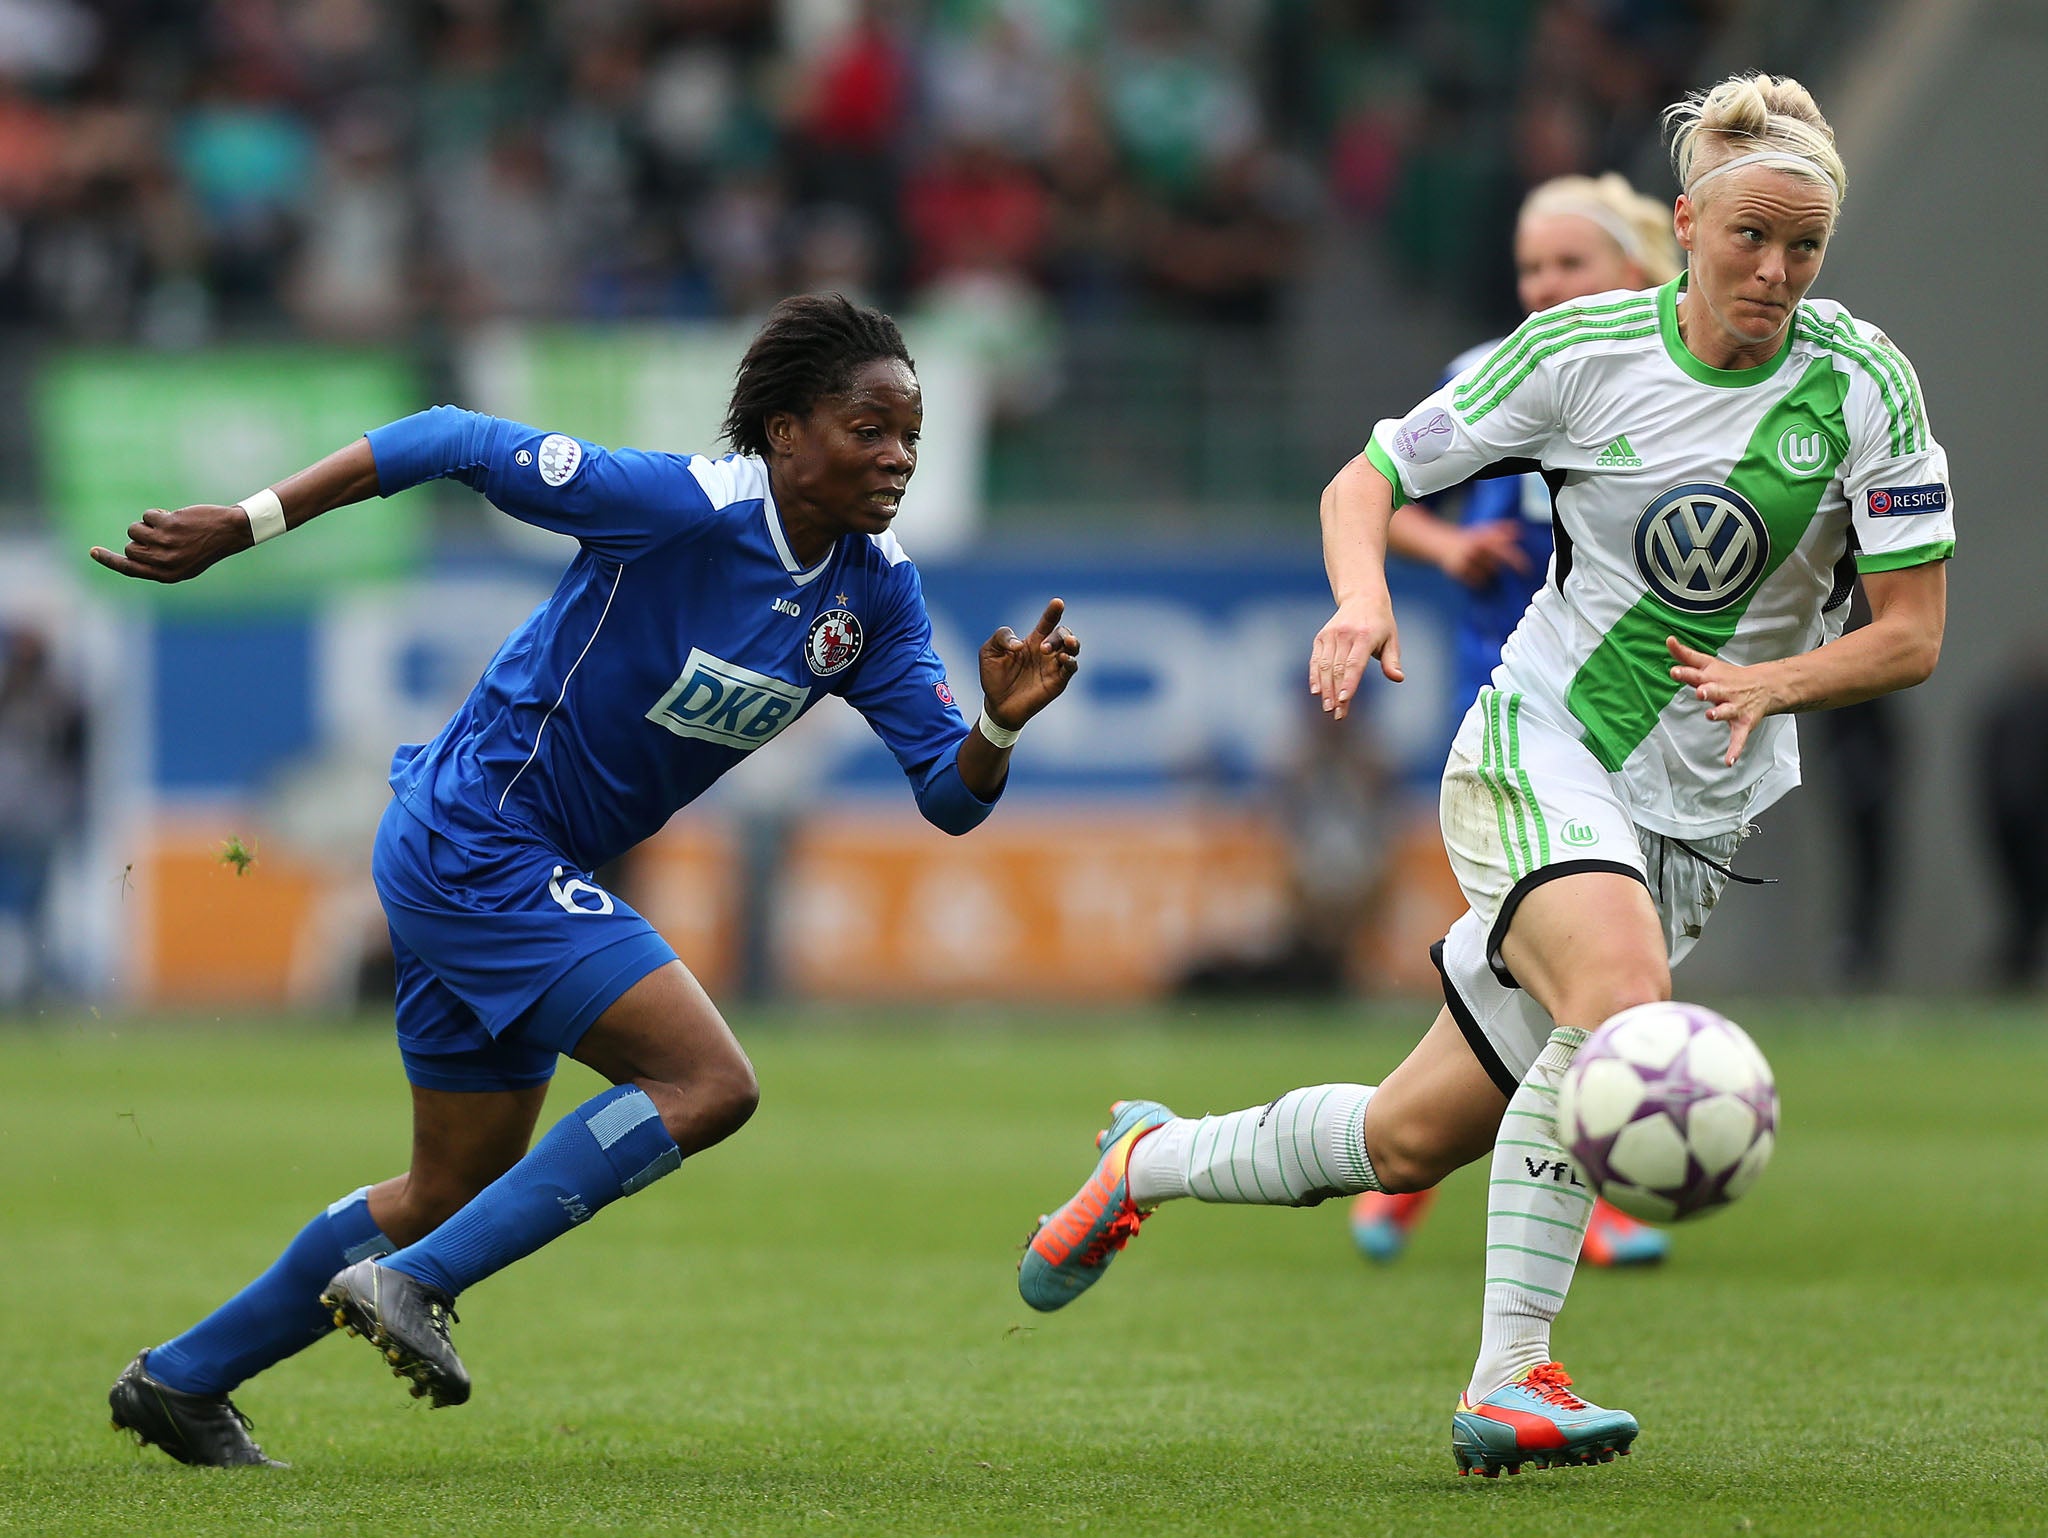 Genoveva Anonma (L) of Potsdam and Nilla Fischer of Wolfsburg vie for the ball during the second UEFA Women's Champions League semi final match